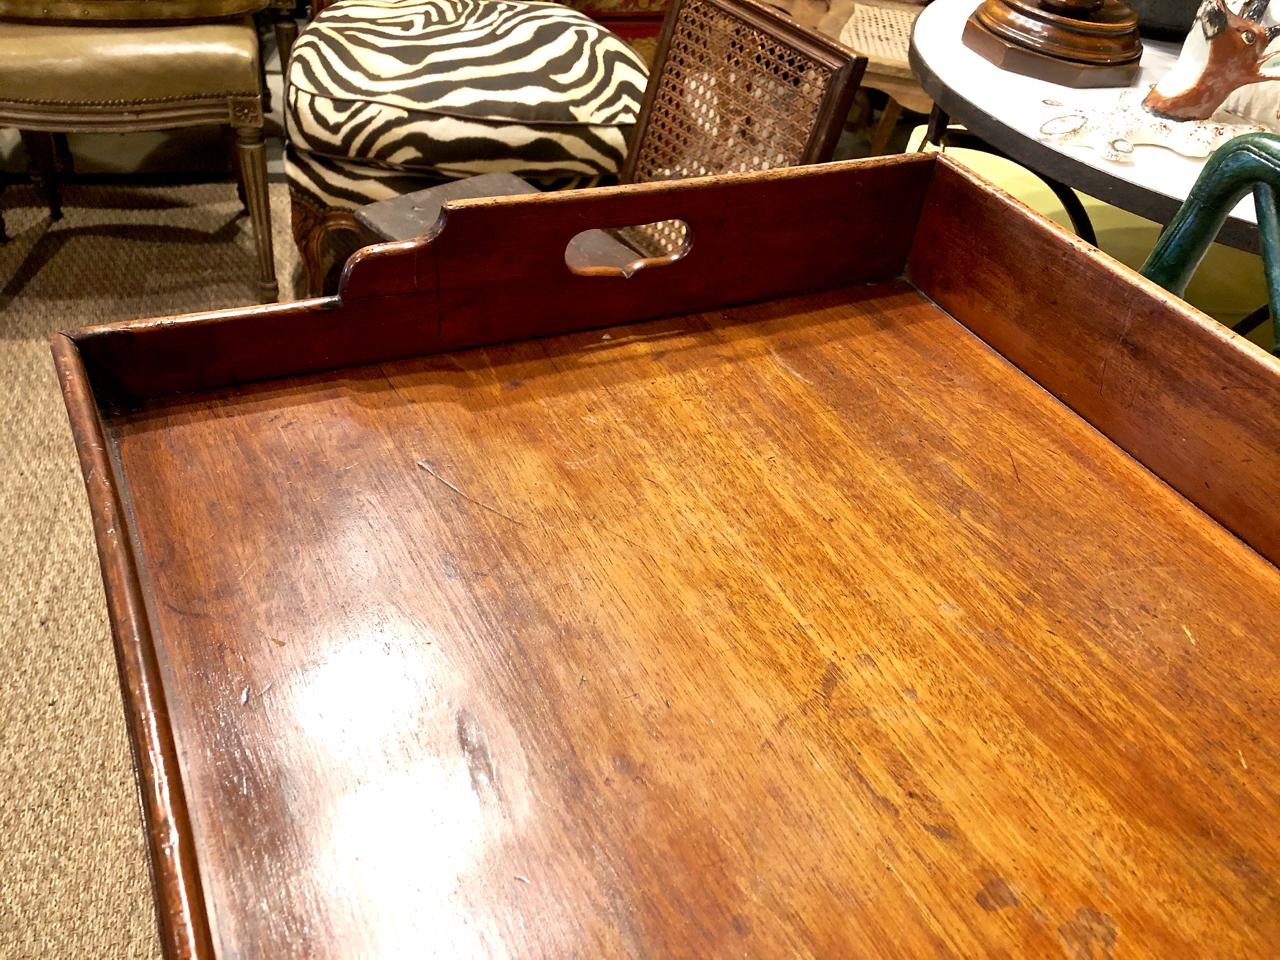 This is a great example of a 19th century Georgian mahogany butler's tray that retains its original patinated mahogany surface.